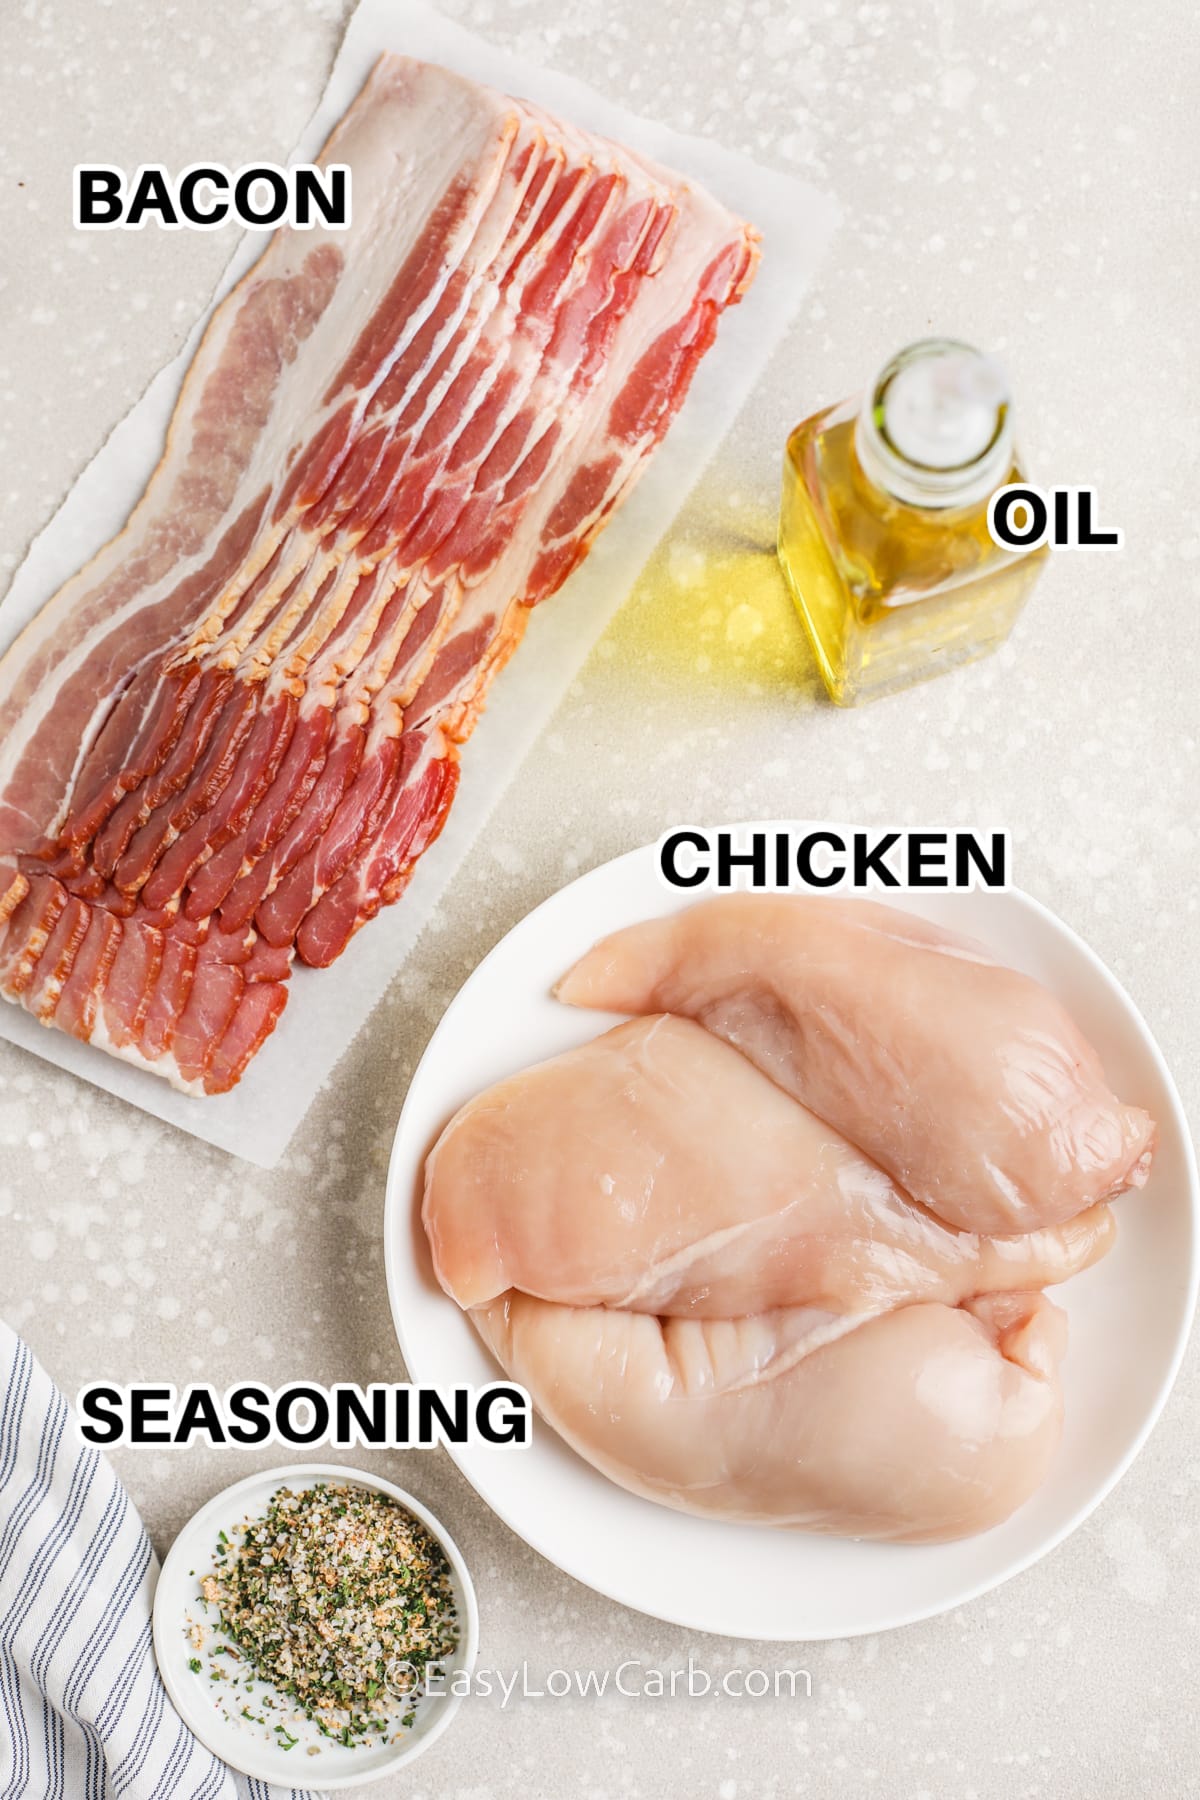 bacon, oil, chicken, and seasoning to make bacon wrapped chicken